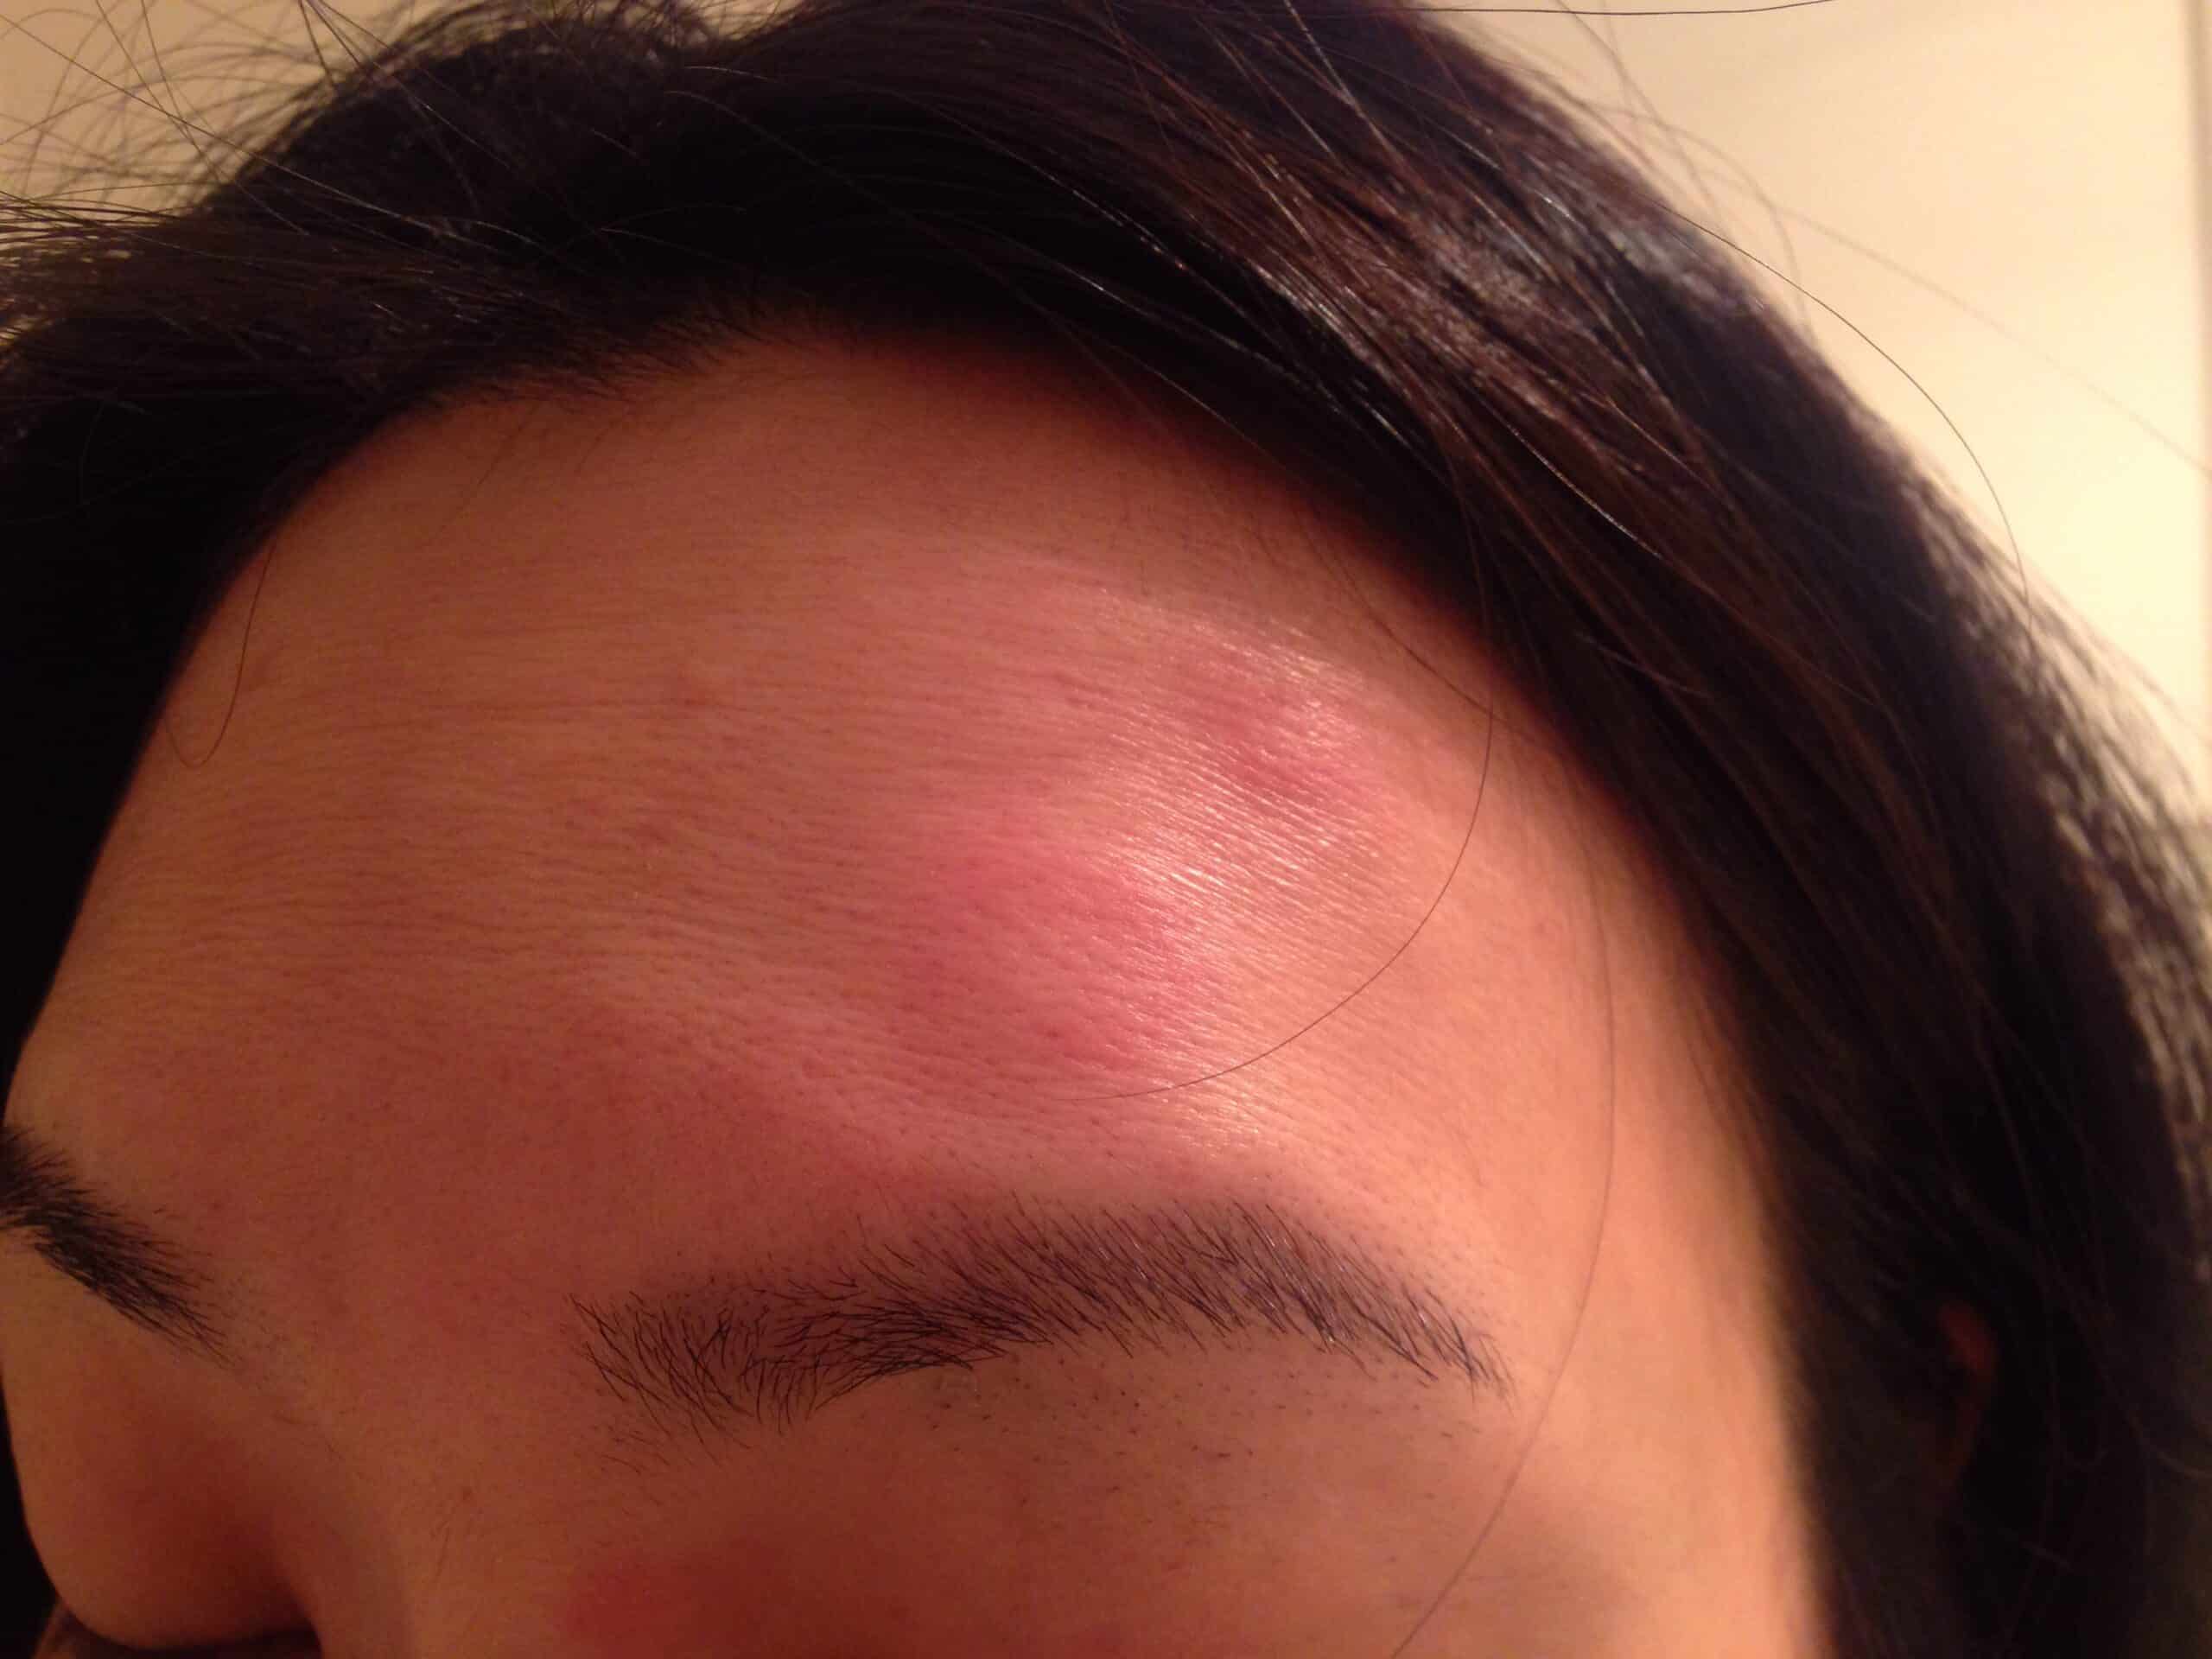 bed bug bite on forehead